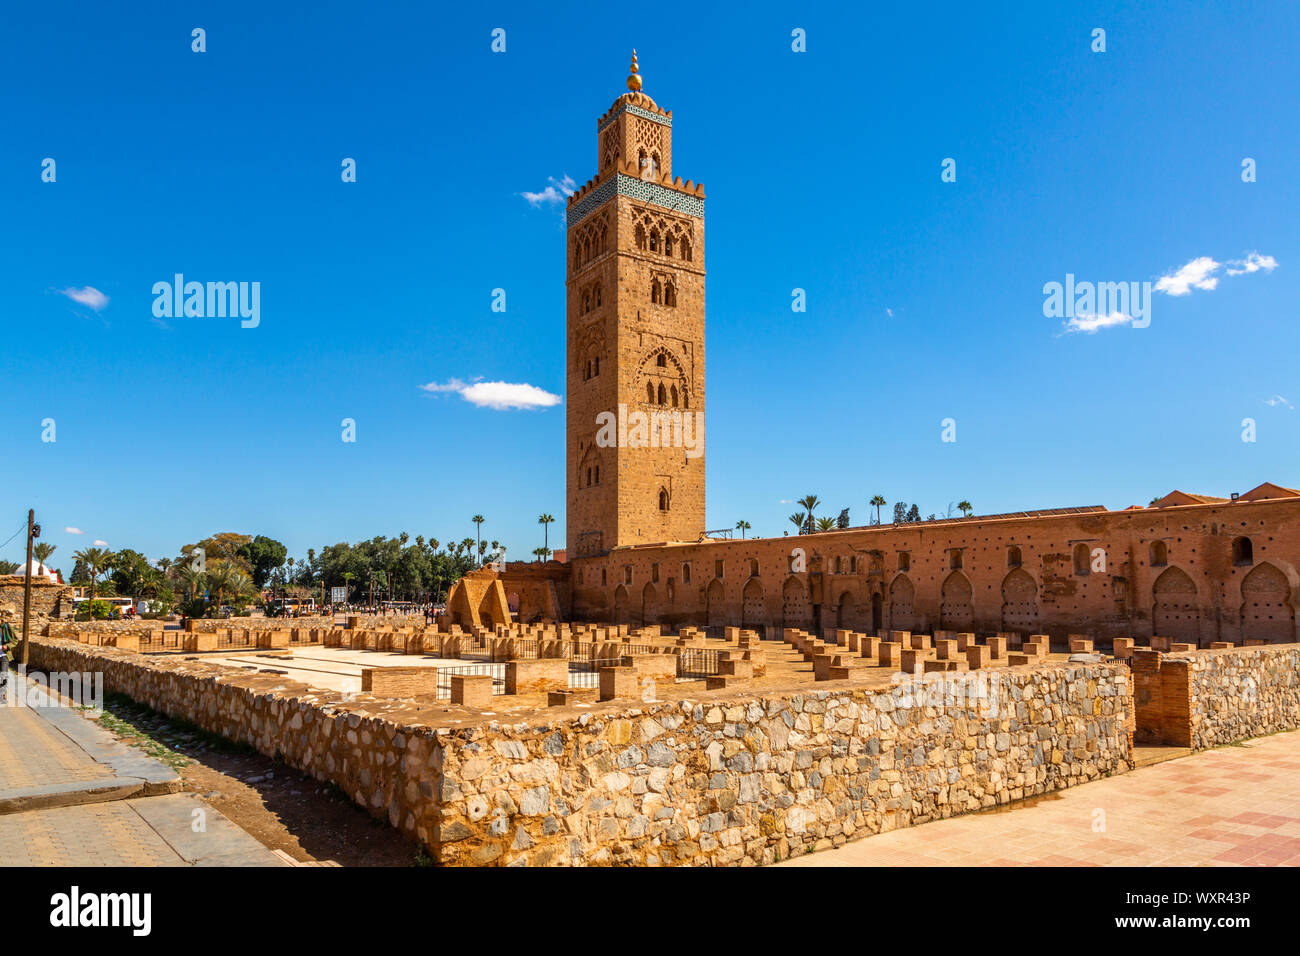 The Koutoubia Mosque is Marrakesh's most famous landmark with its 70 metre  tall minaret visible for miles in every direction Marrakesh Morocco Stock  Photo - Alamy